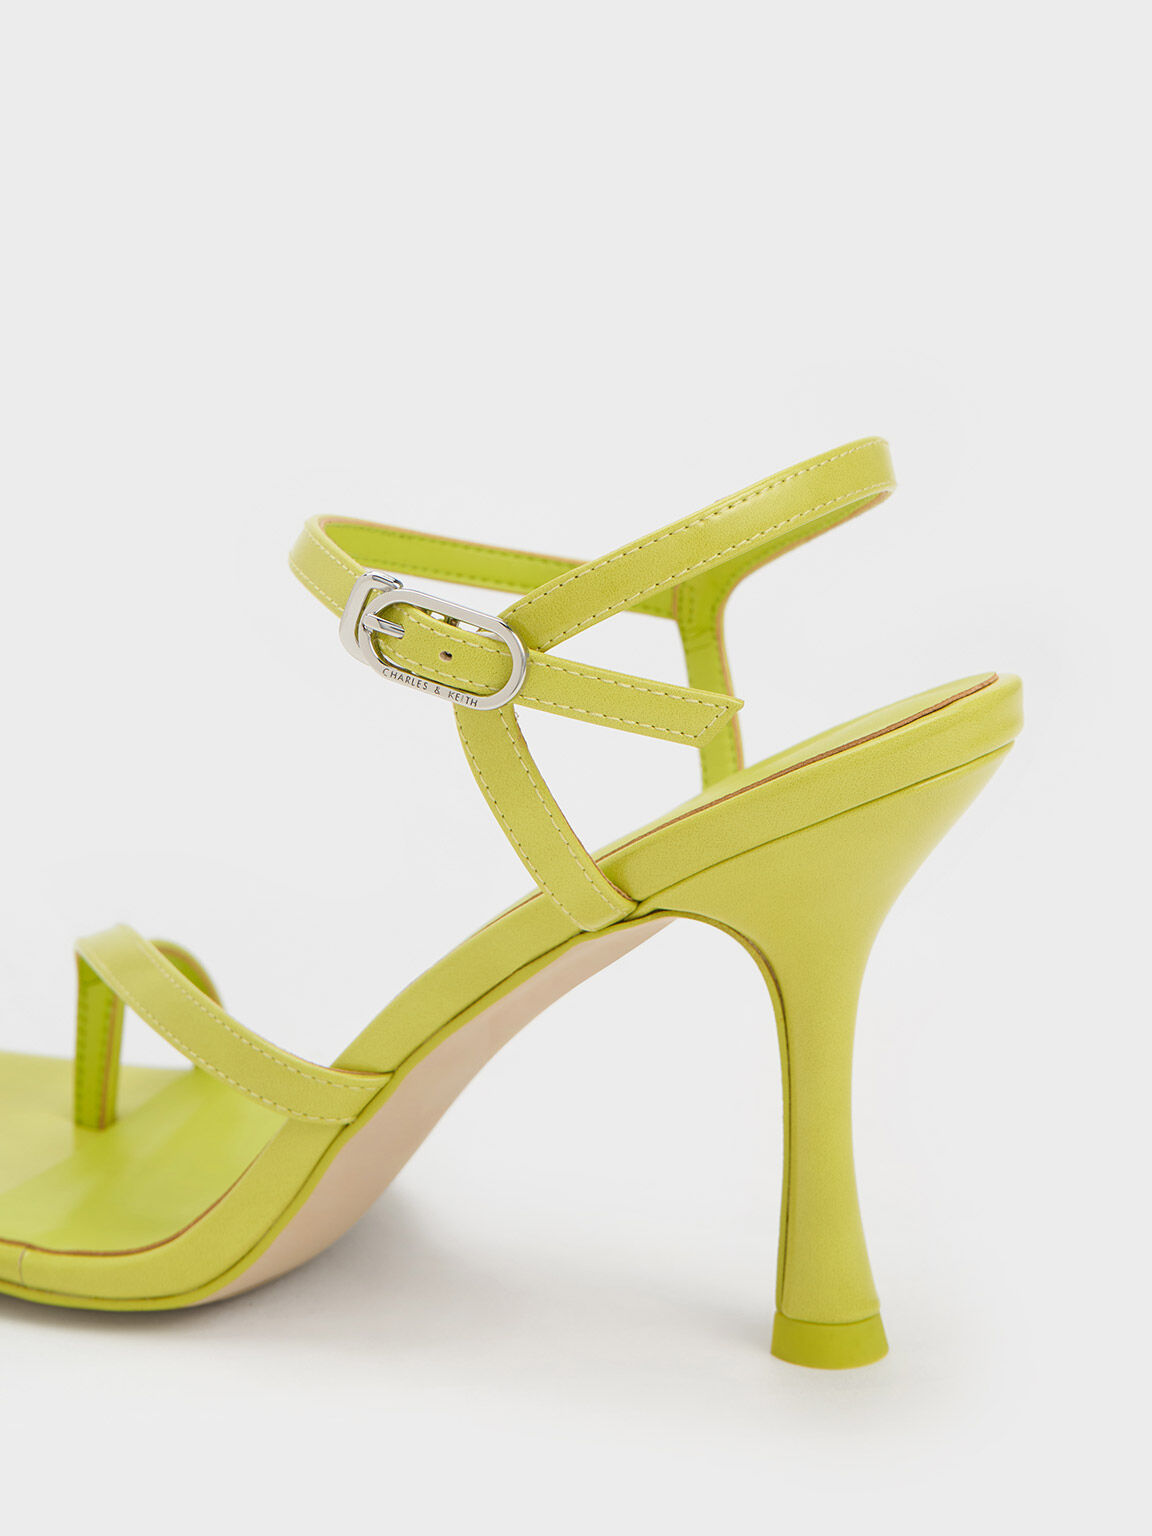 Neon yellow strappy stiletto heels shoes cs-0010 · Mileg · Online Store  Powered by Storenvy